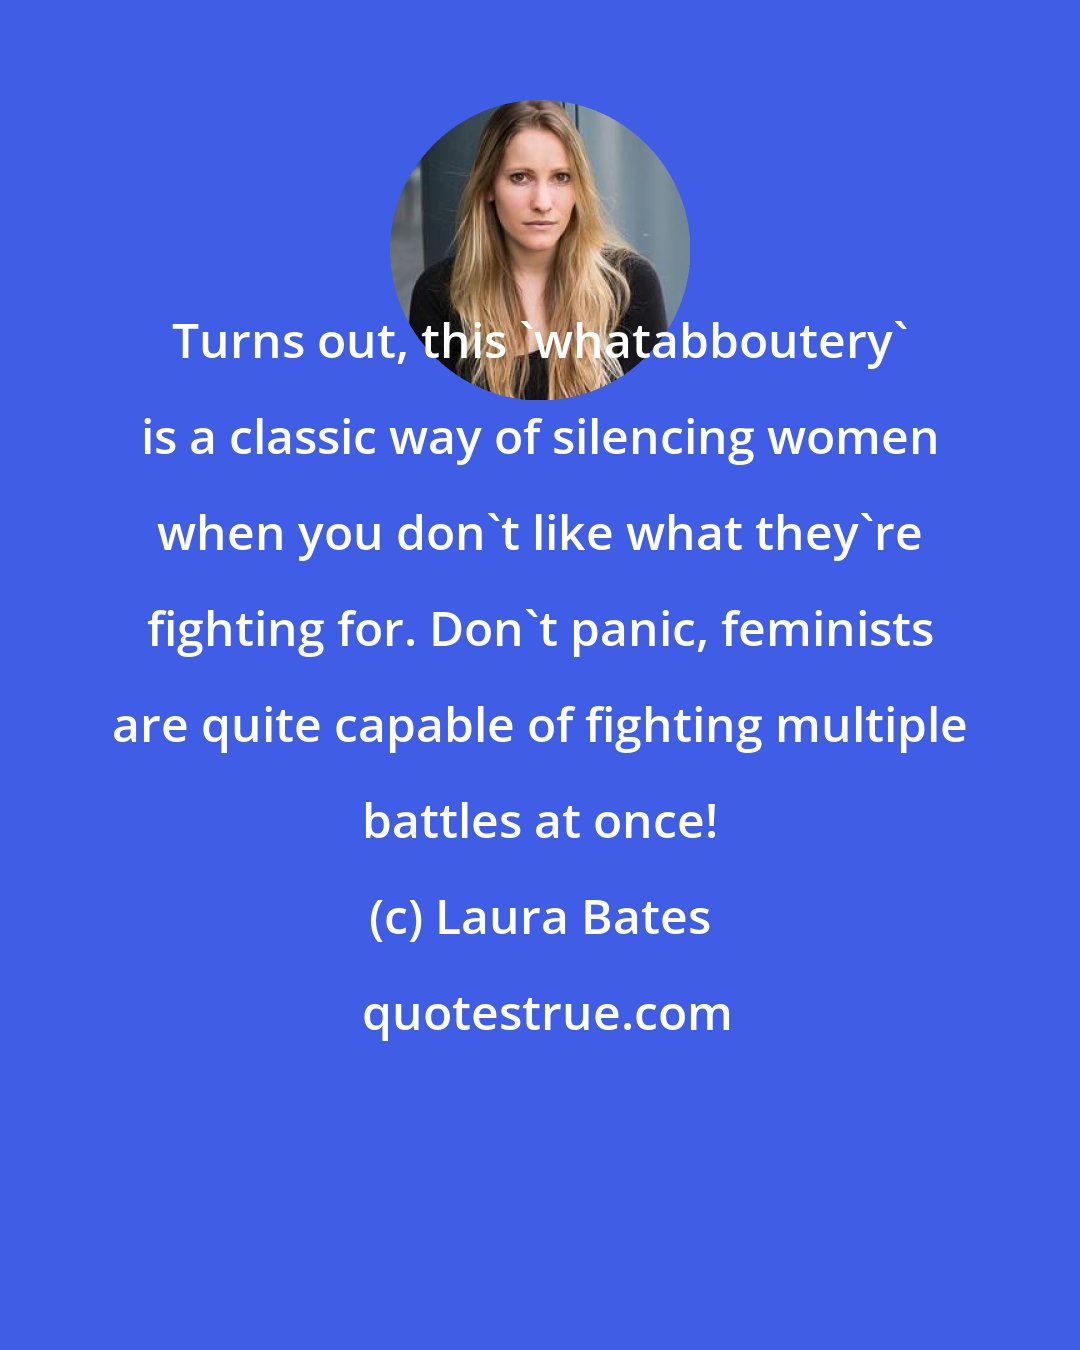 Laura Bates: Turns out, this 'whatabboutery' is a classic way of silencing women when you don't like what they're fighting for. Don't panic, feminists are quite capable of fighting multiple battles at once!